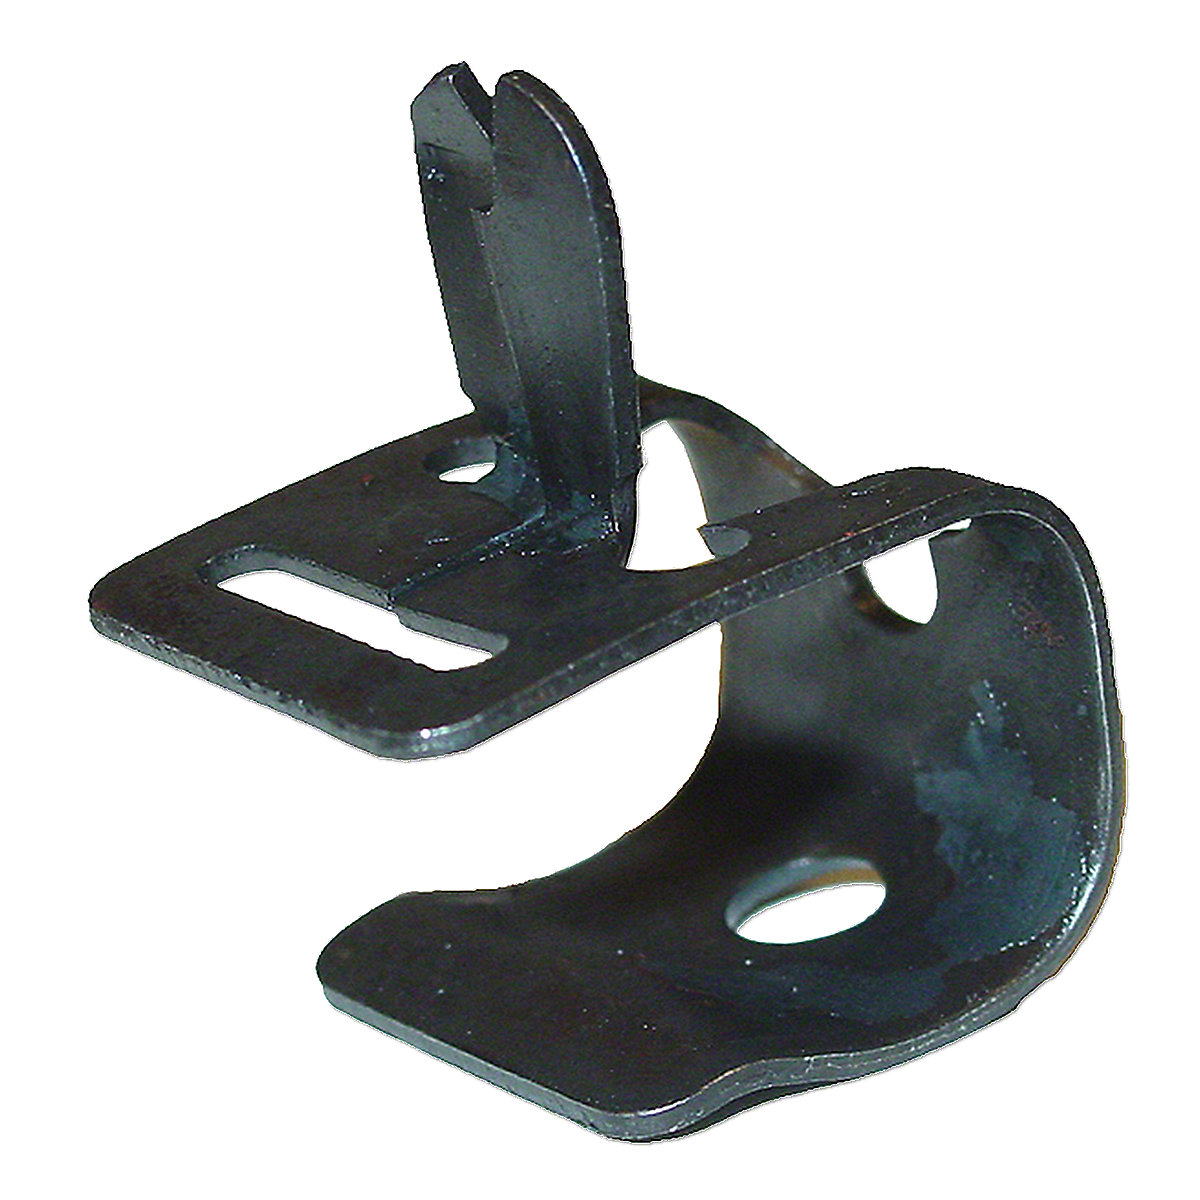 Wiring Clip For 17/32 Holes For Massey Harris And Massey Ferguson Tractors.